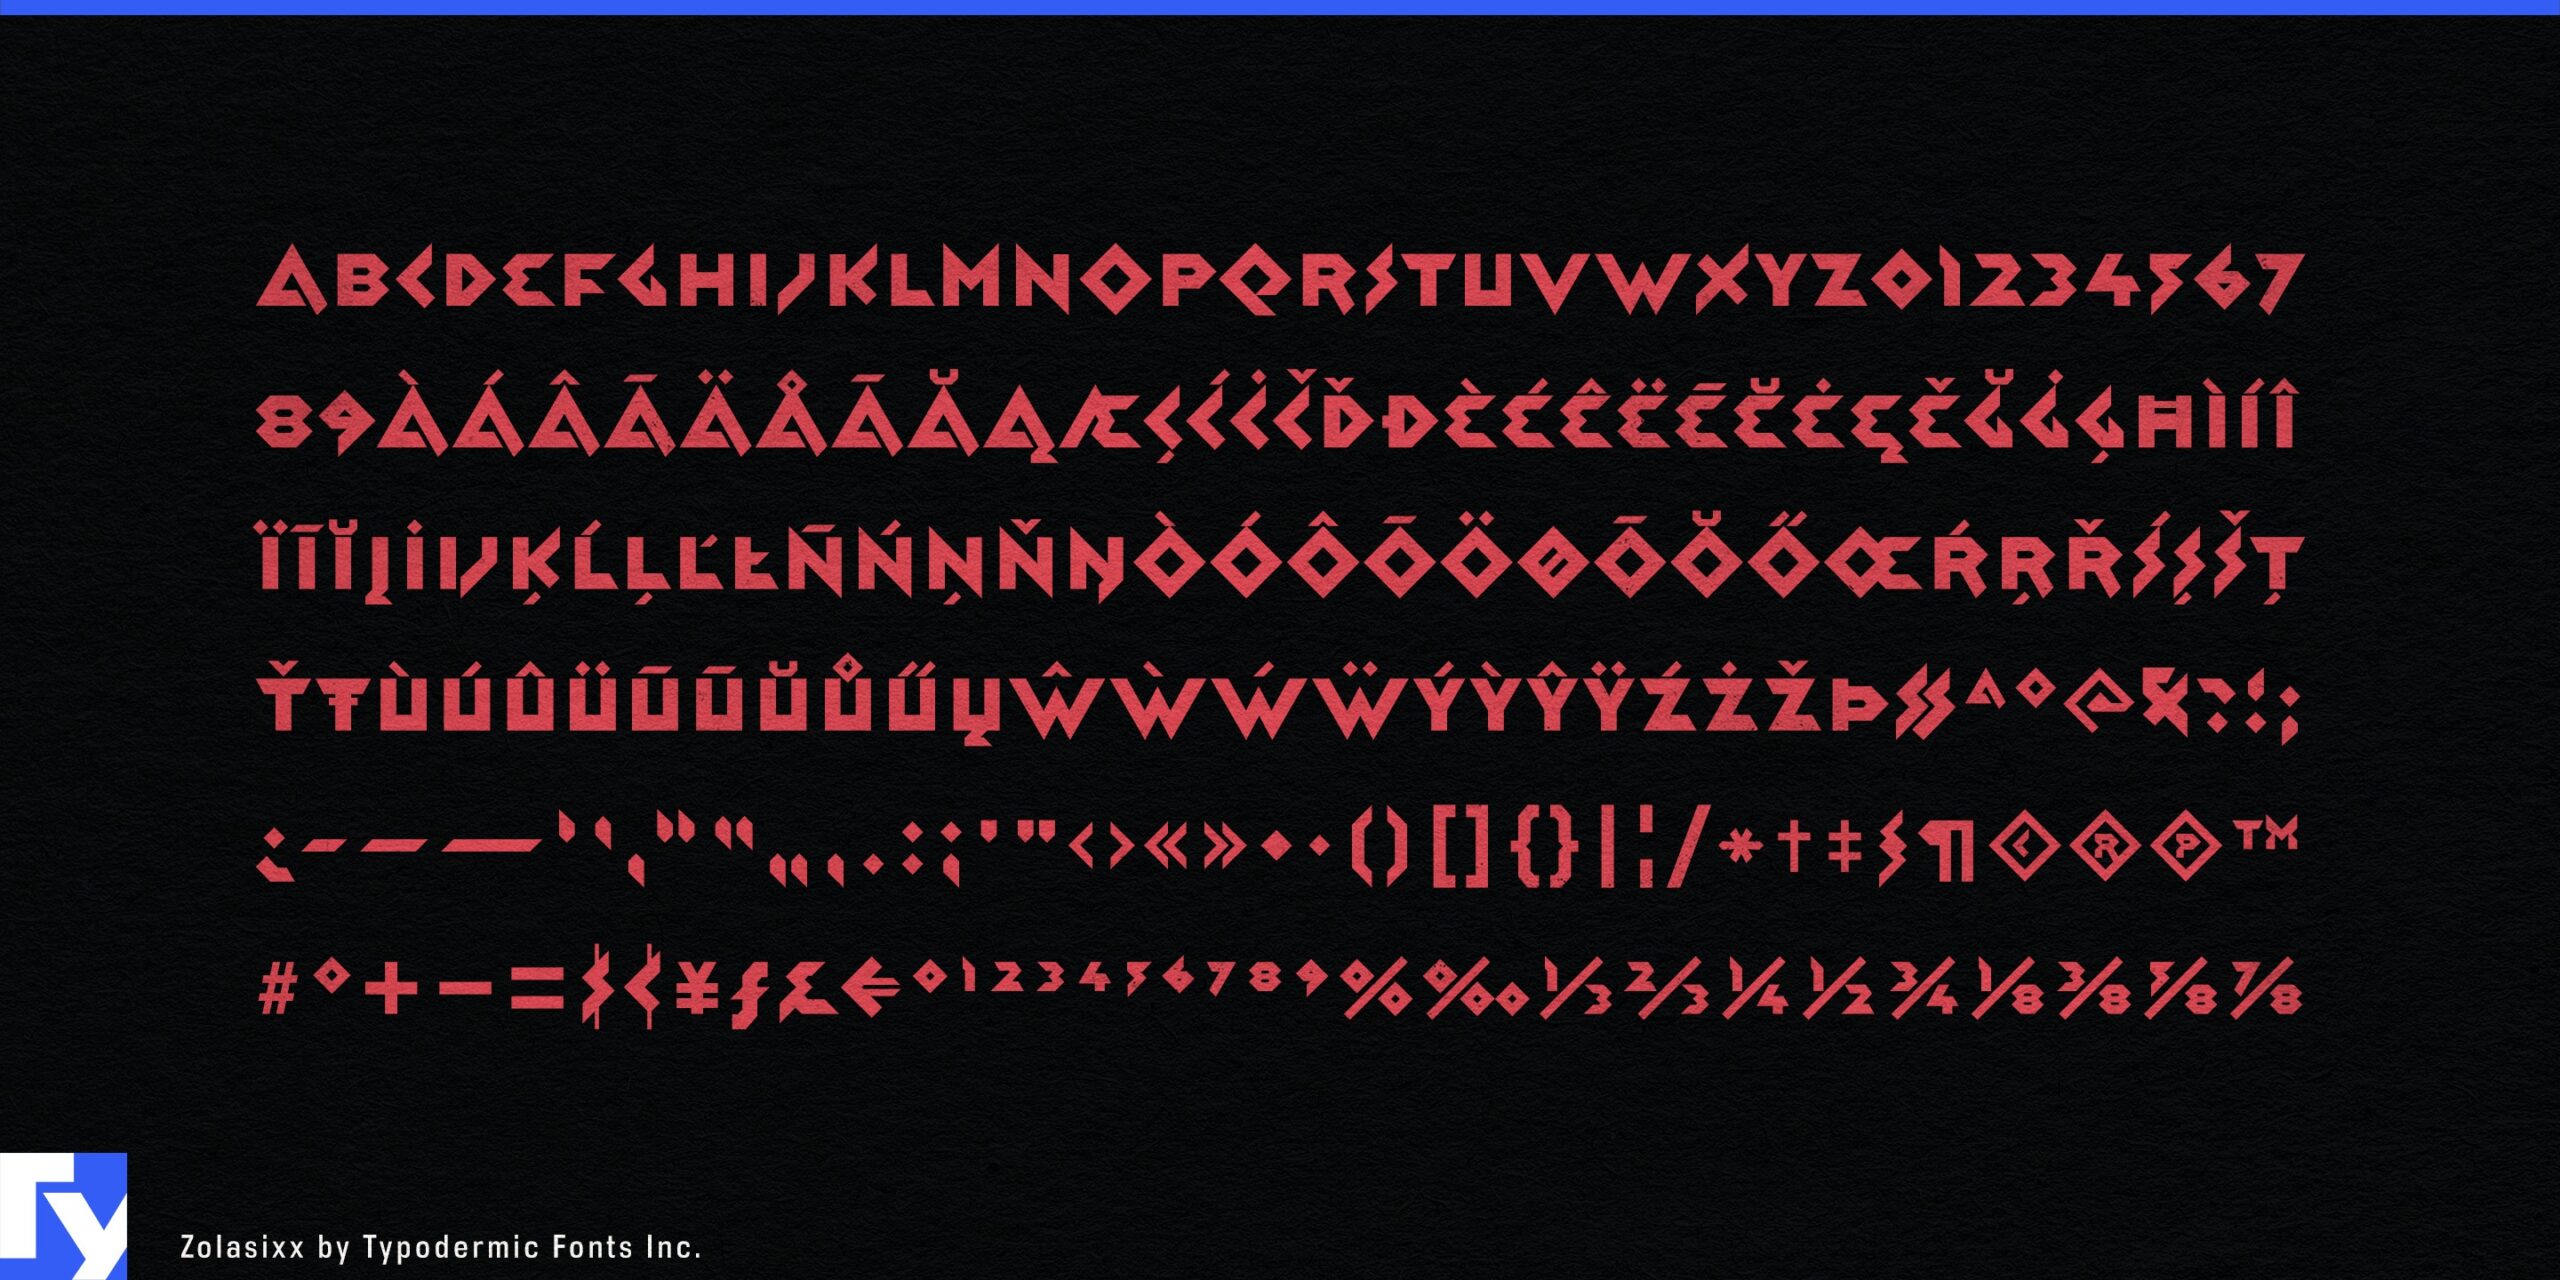 Aggressive Technological Voice: Zolasixx Typeface Takes Charge